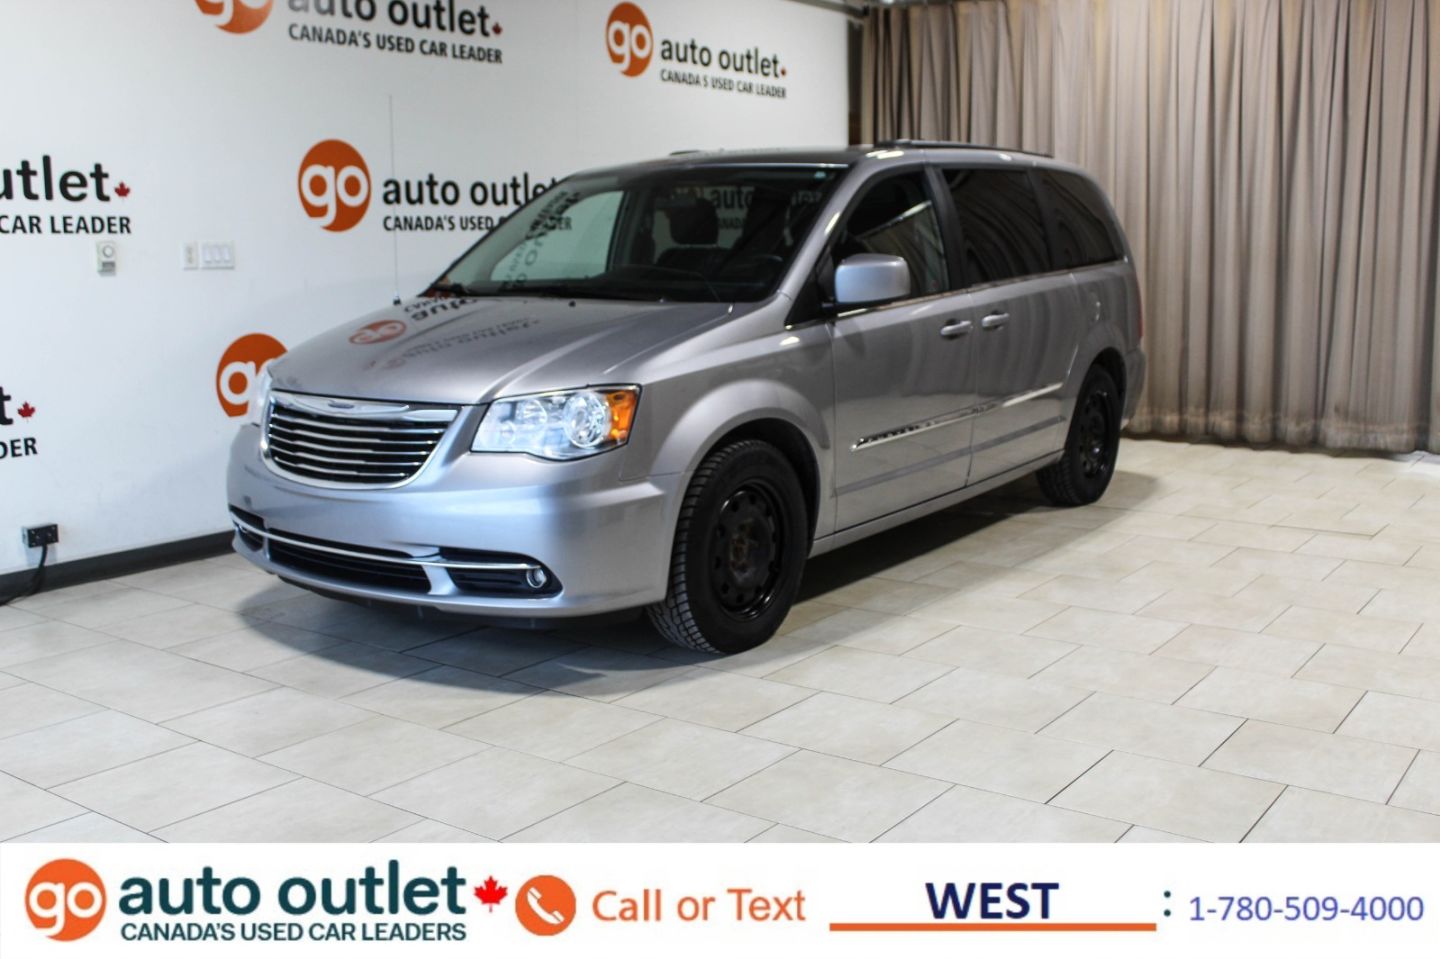 chrysler town and country van for sale